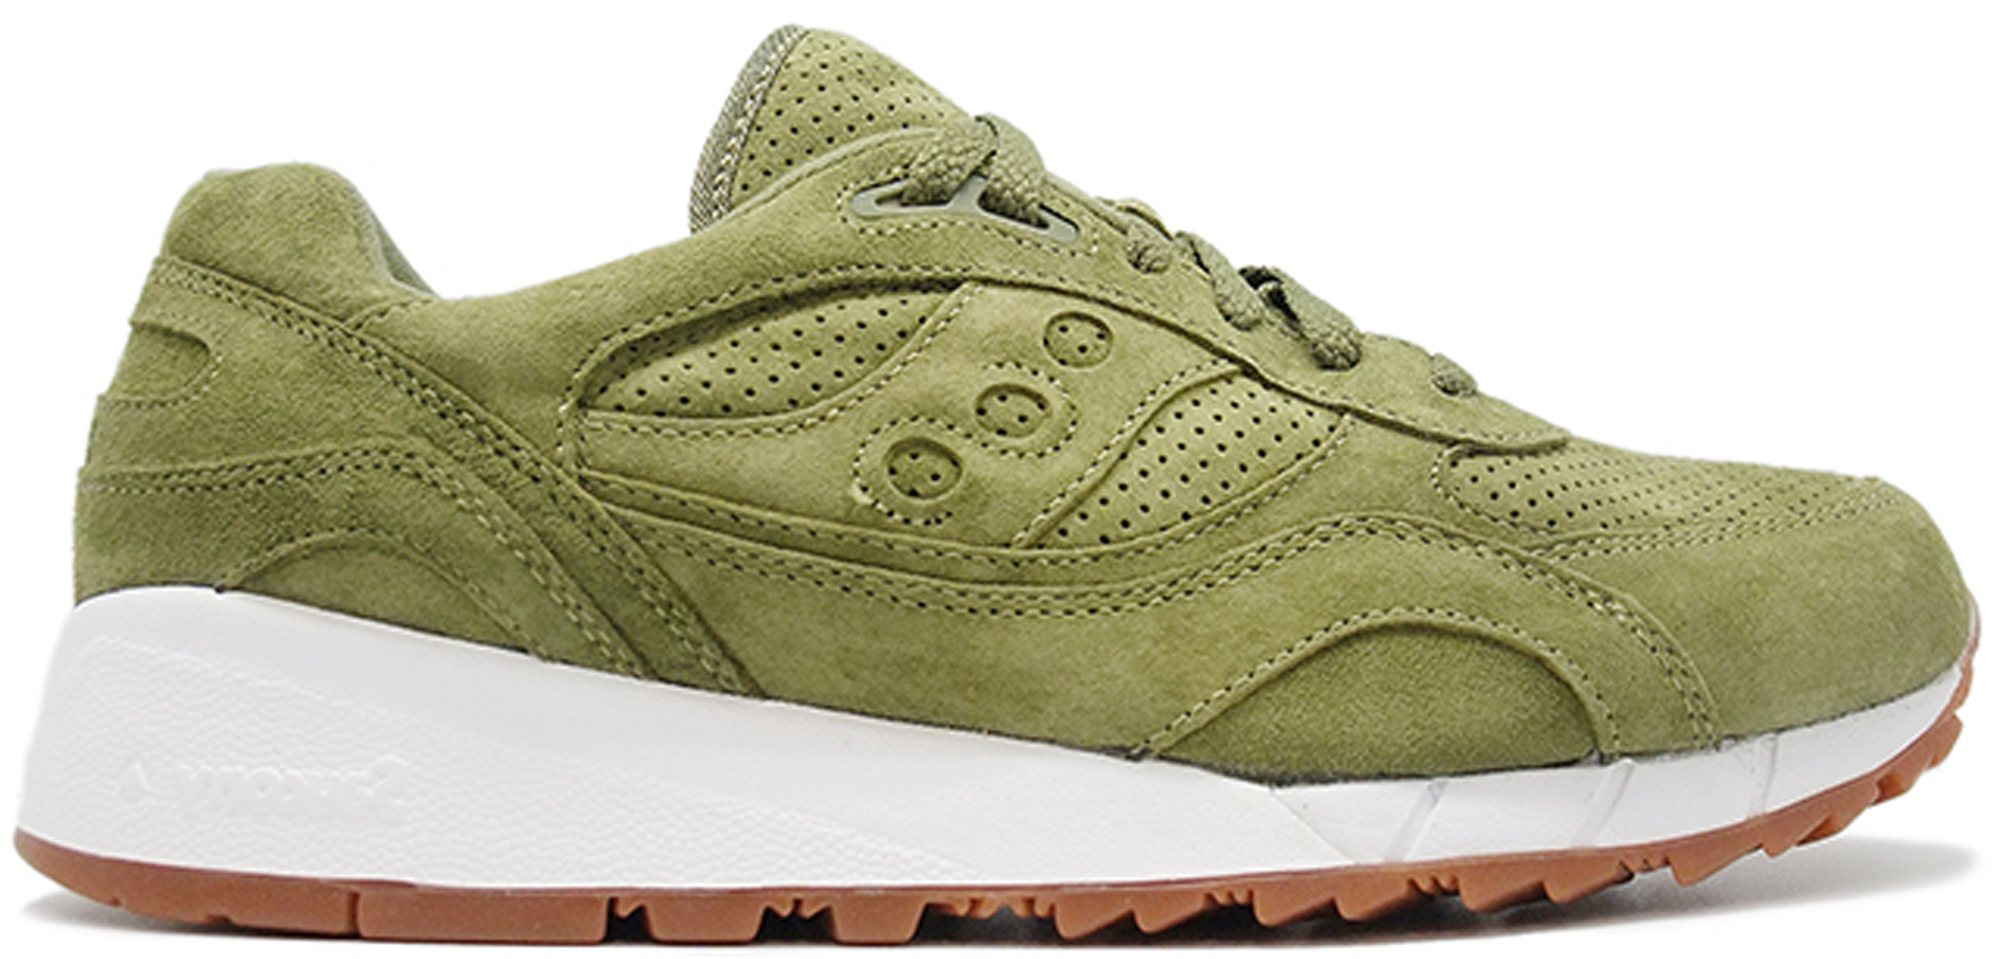 Saucony Shadow 6000 Olive Suede (Packer 